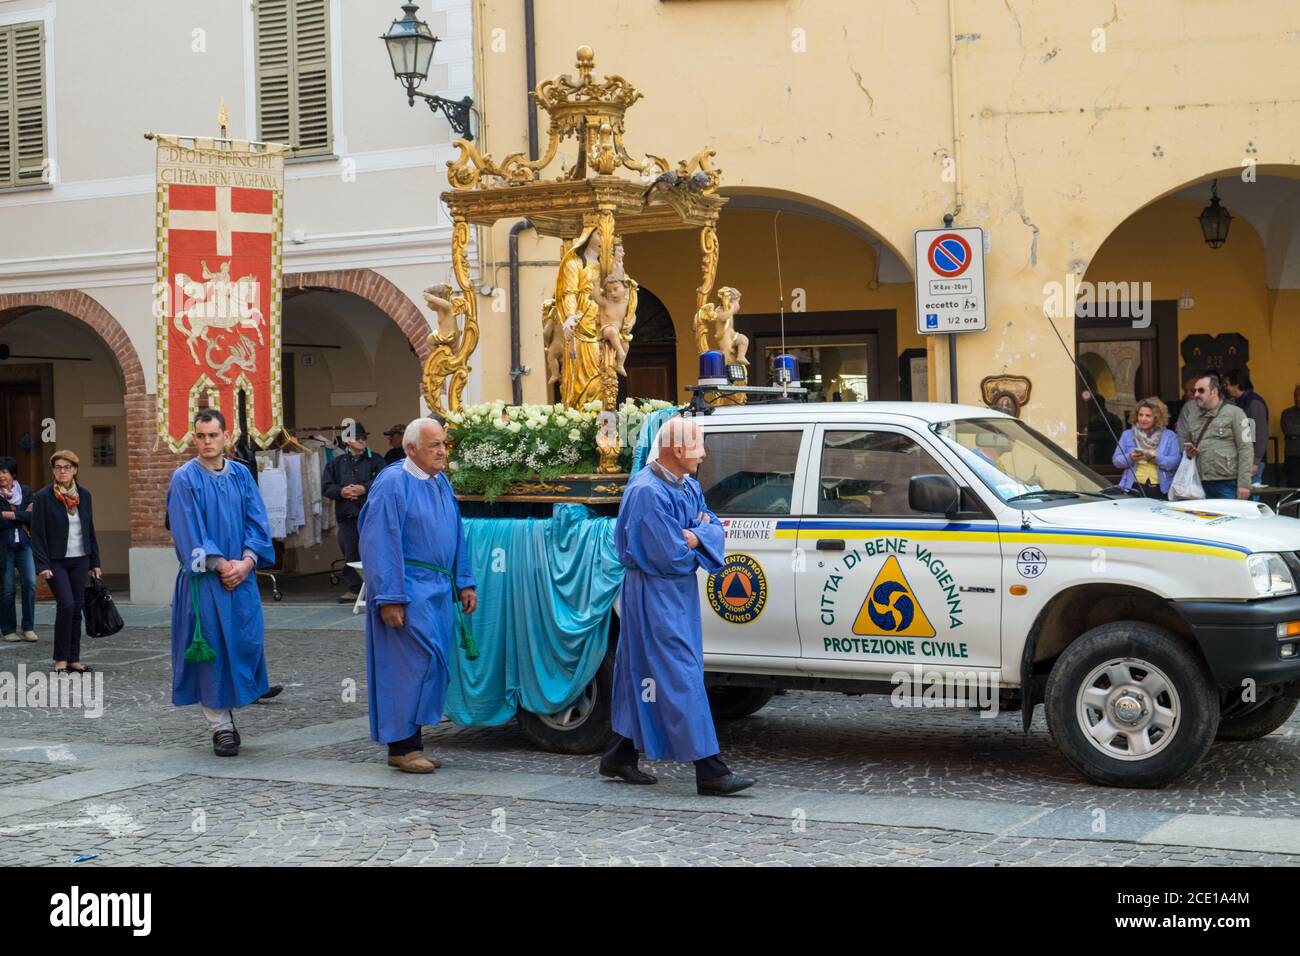 Catholic religious procession in the small town of Bene Vagienna, Cuneo, Italy Stock Photo